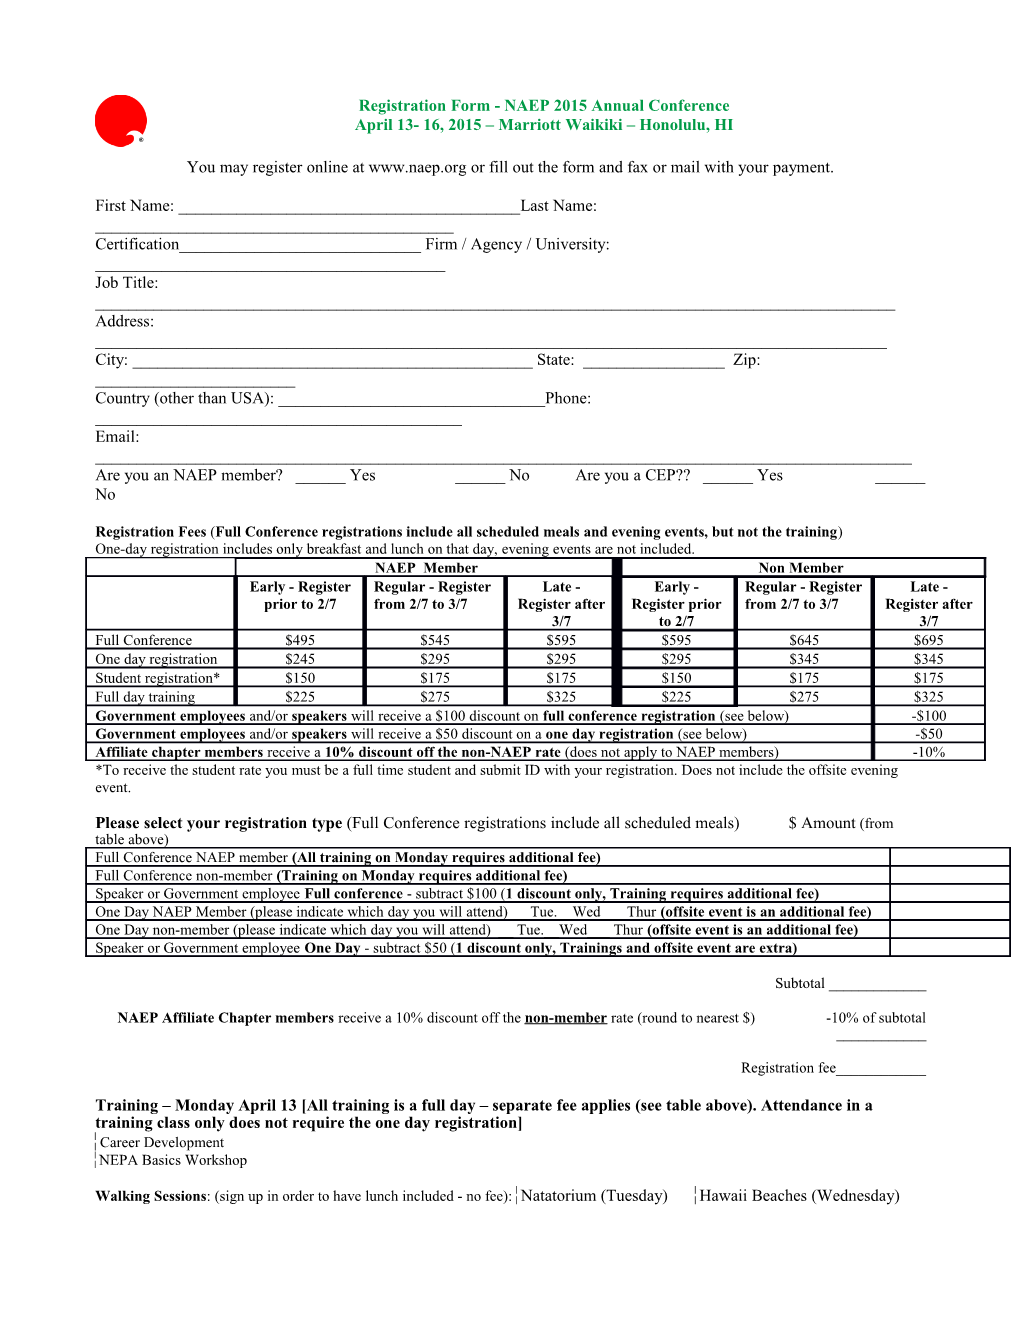 Registration Form for NAEP/AEP 2008 Conference